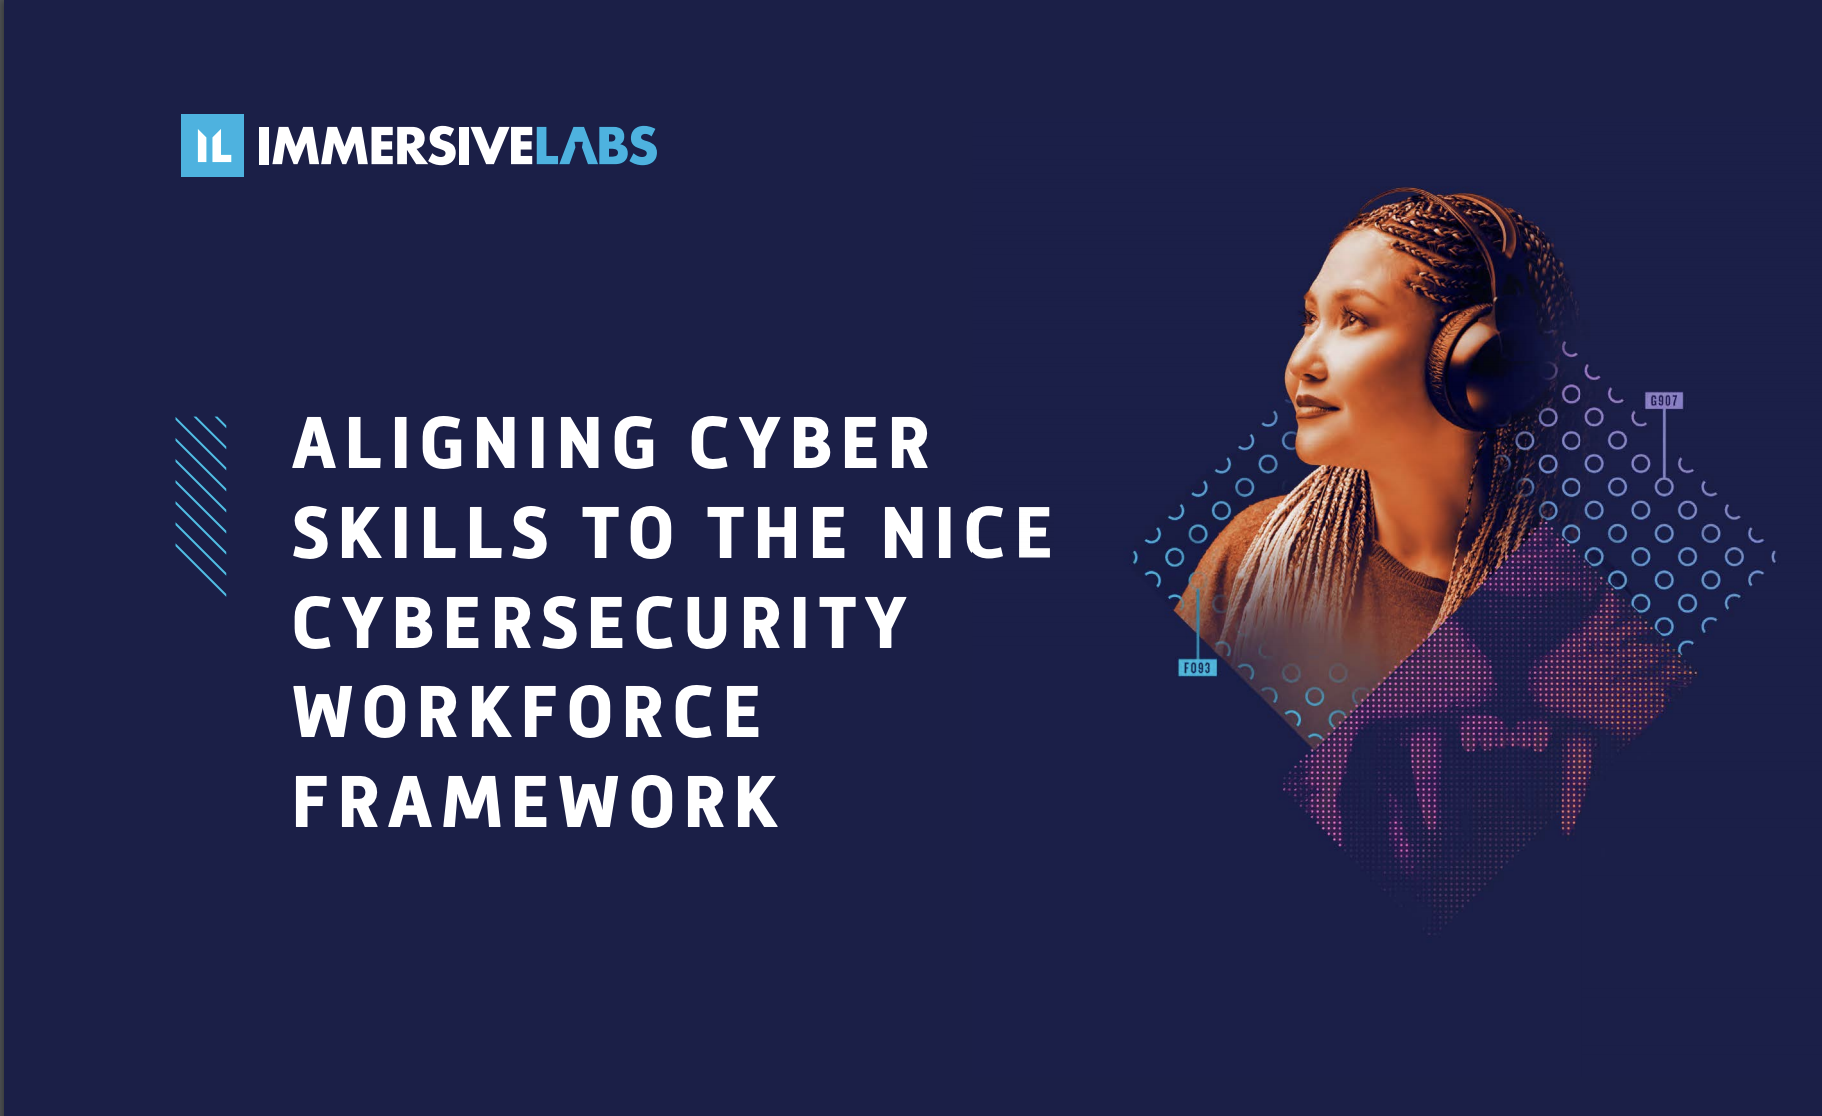 Aligning Cyber Skills to the NICE Cybersecurity Workforce Framework